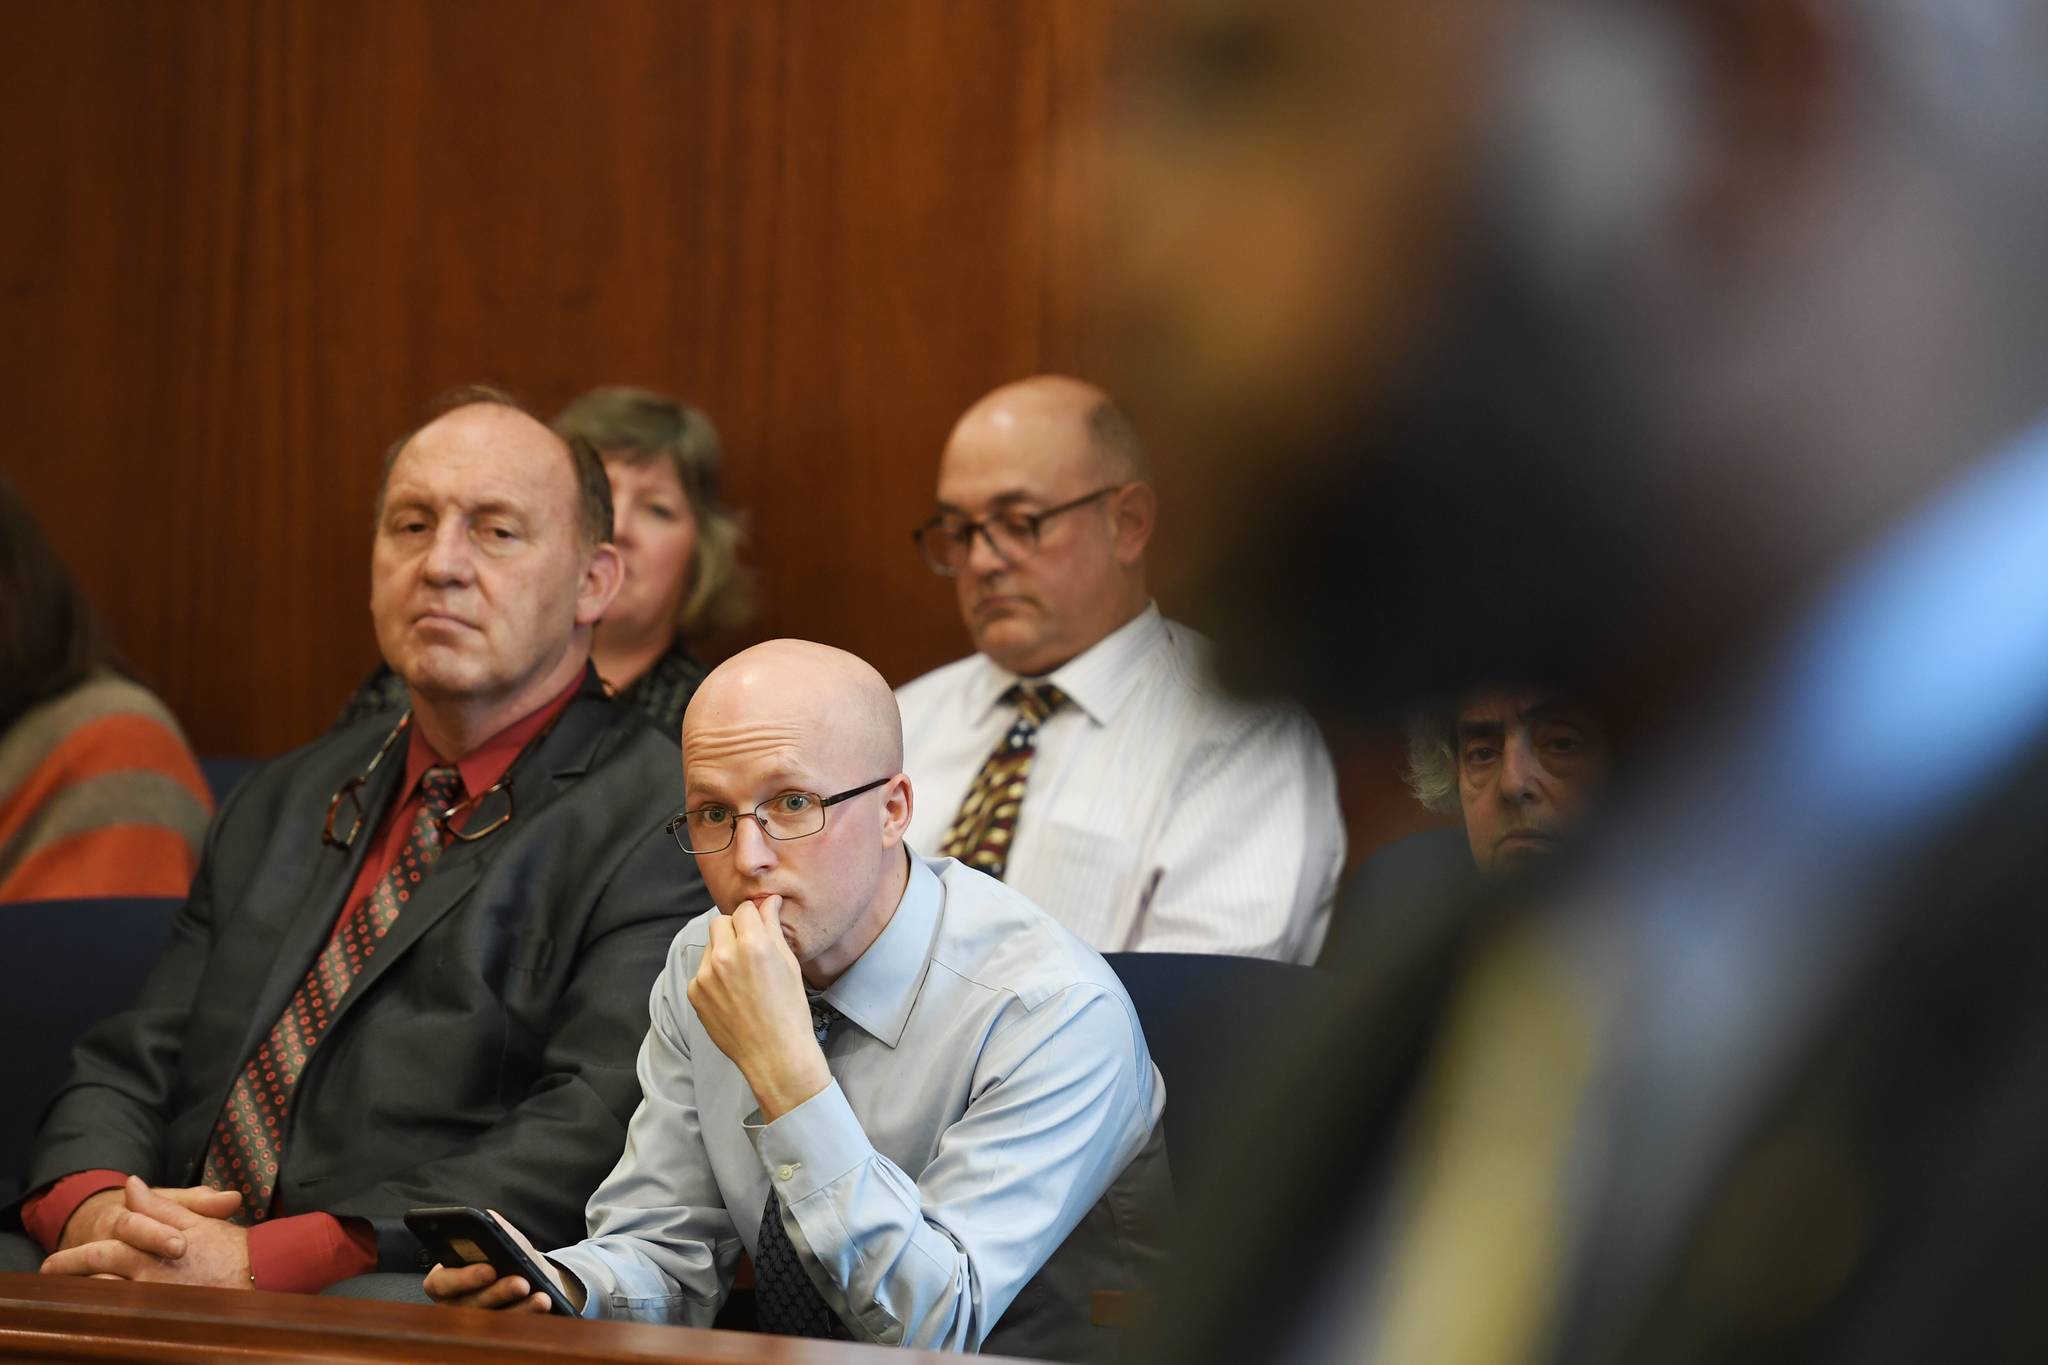 House member Rep. Gary Knopp, R-Kenai, left, Rep. Sara Hannan, D-Juneau, Rep. Jonathan Kreiss-Tomkins, D-Sitka, and Rep. Andy Josephson, D-Anchorage, listen to Sen. David Wilson, R-Wasilla, from the Senate gallery as Wilson speaks on the the operating budget at the Capitol on Monday, July 29, 2019 (Michael Penn | Juneau Empire)